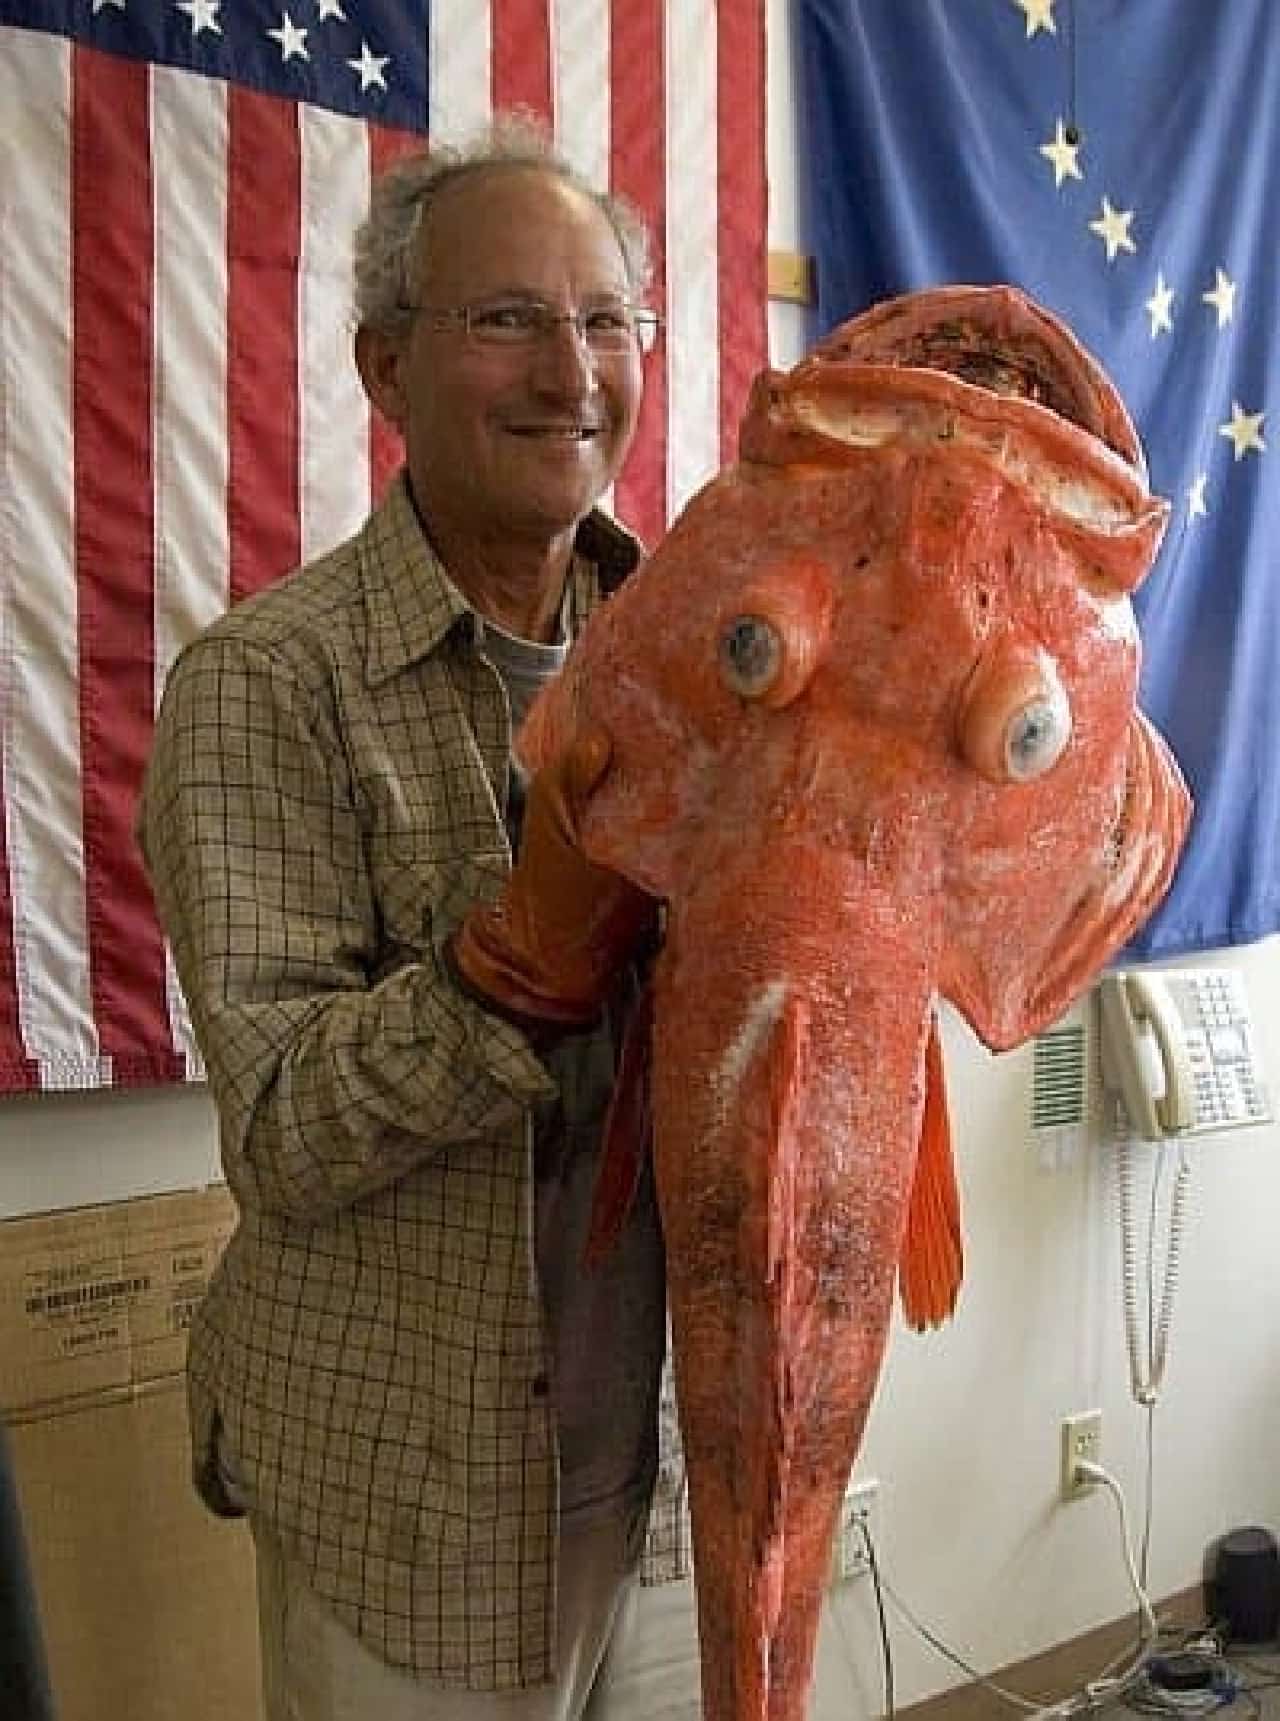 The reef fish caught by Mr. Liebman is 41 inches (about 104 cm) in length (Source: New York Daily News)